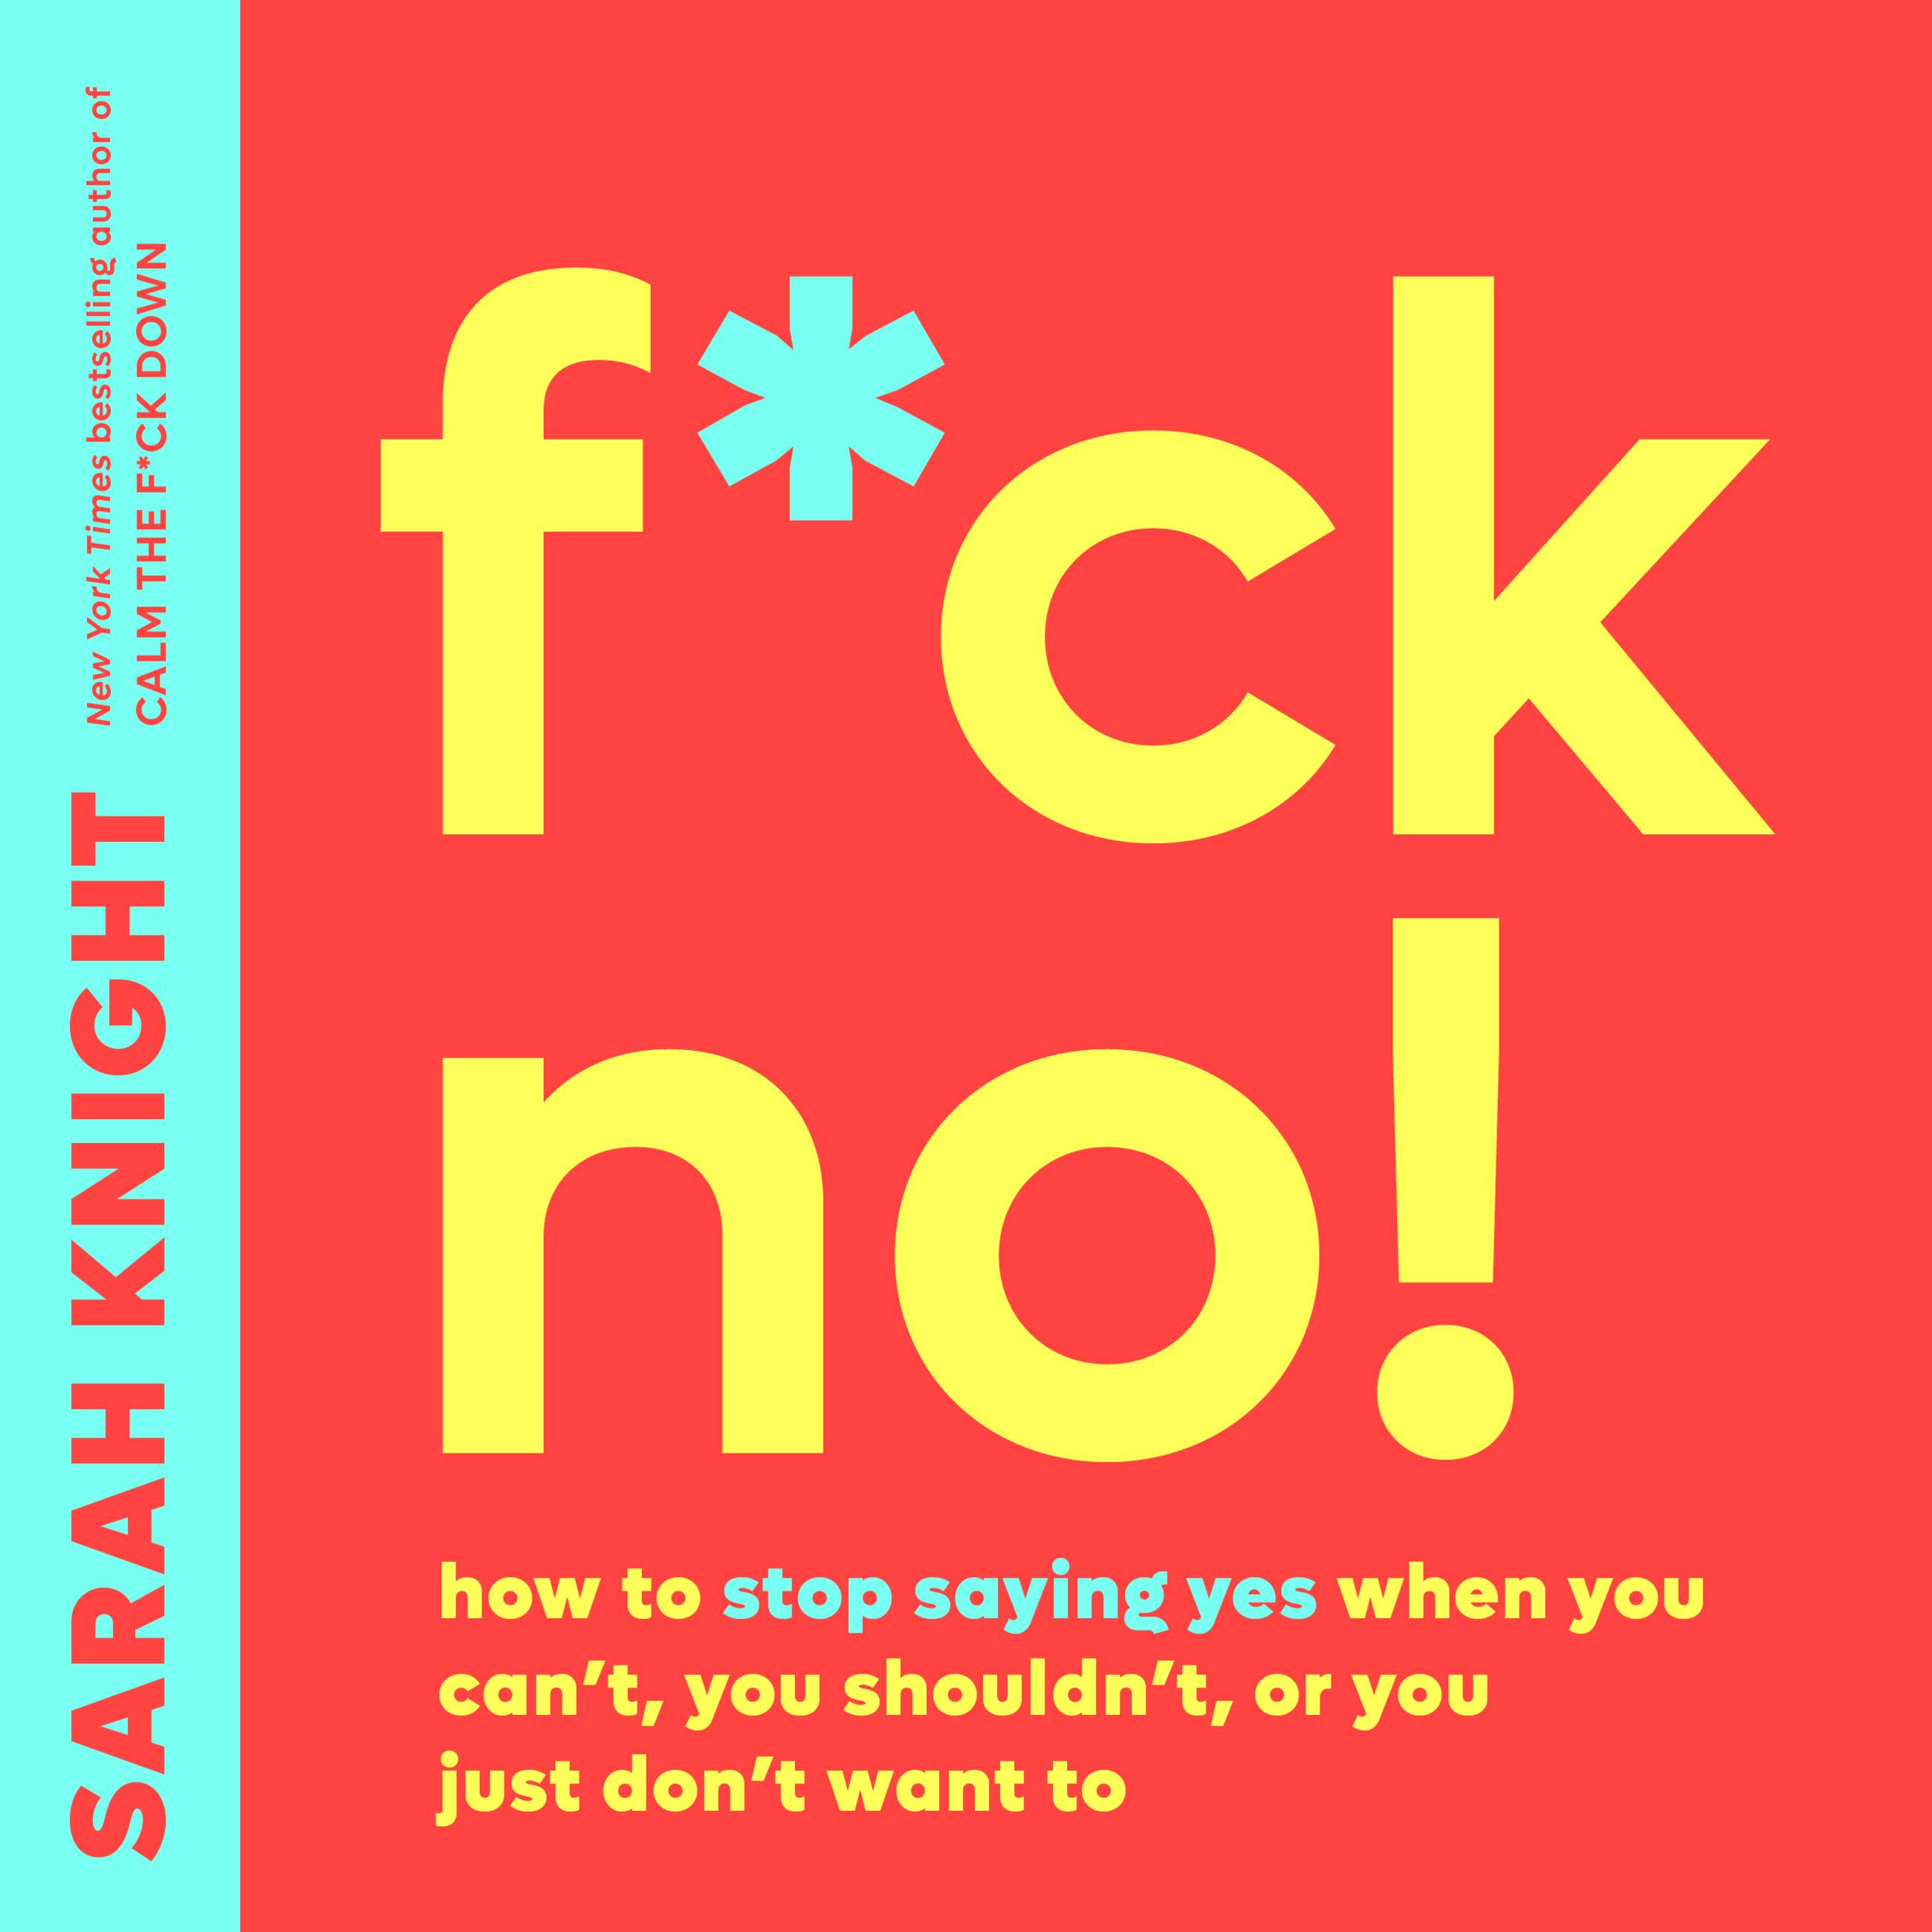 F*ck No! by Sarah Knight Hachette Book Group